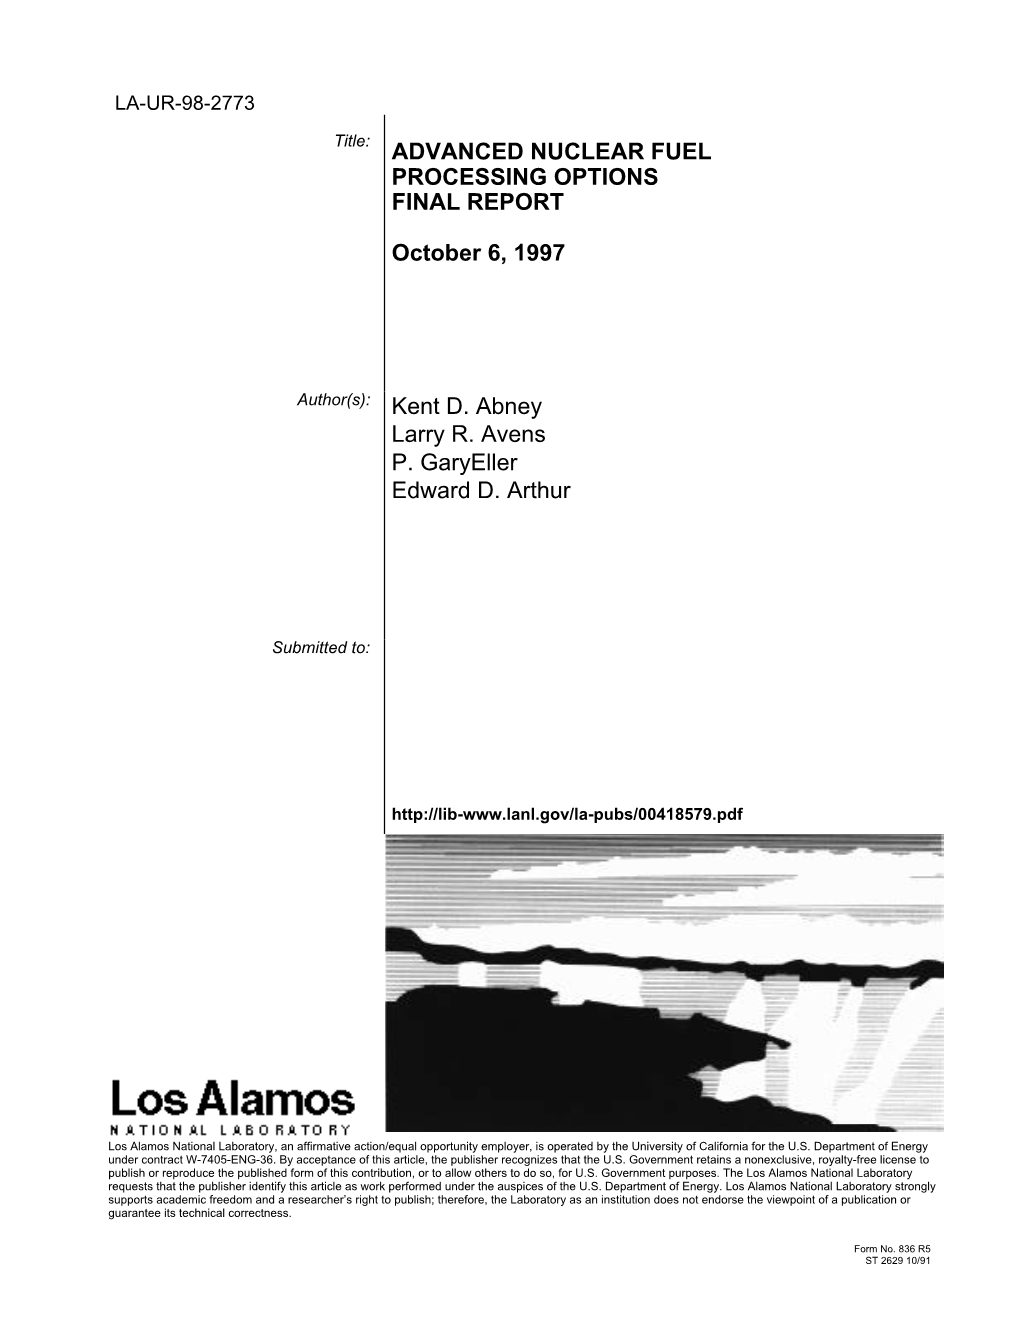 ADVANCED NUCLEAR FUEL PROCESSING OPTIONS FINAL REPORT October 6, 1997 Author(S): Kent D. Abney Larry R. Avens P. Garyeller Edwar